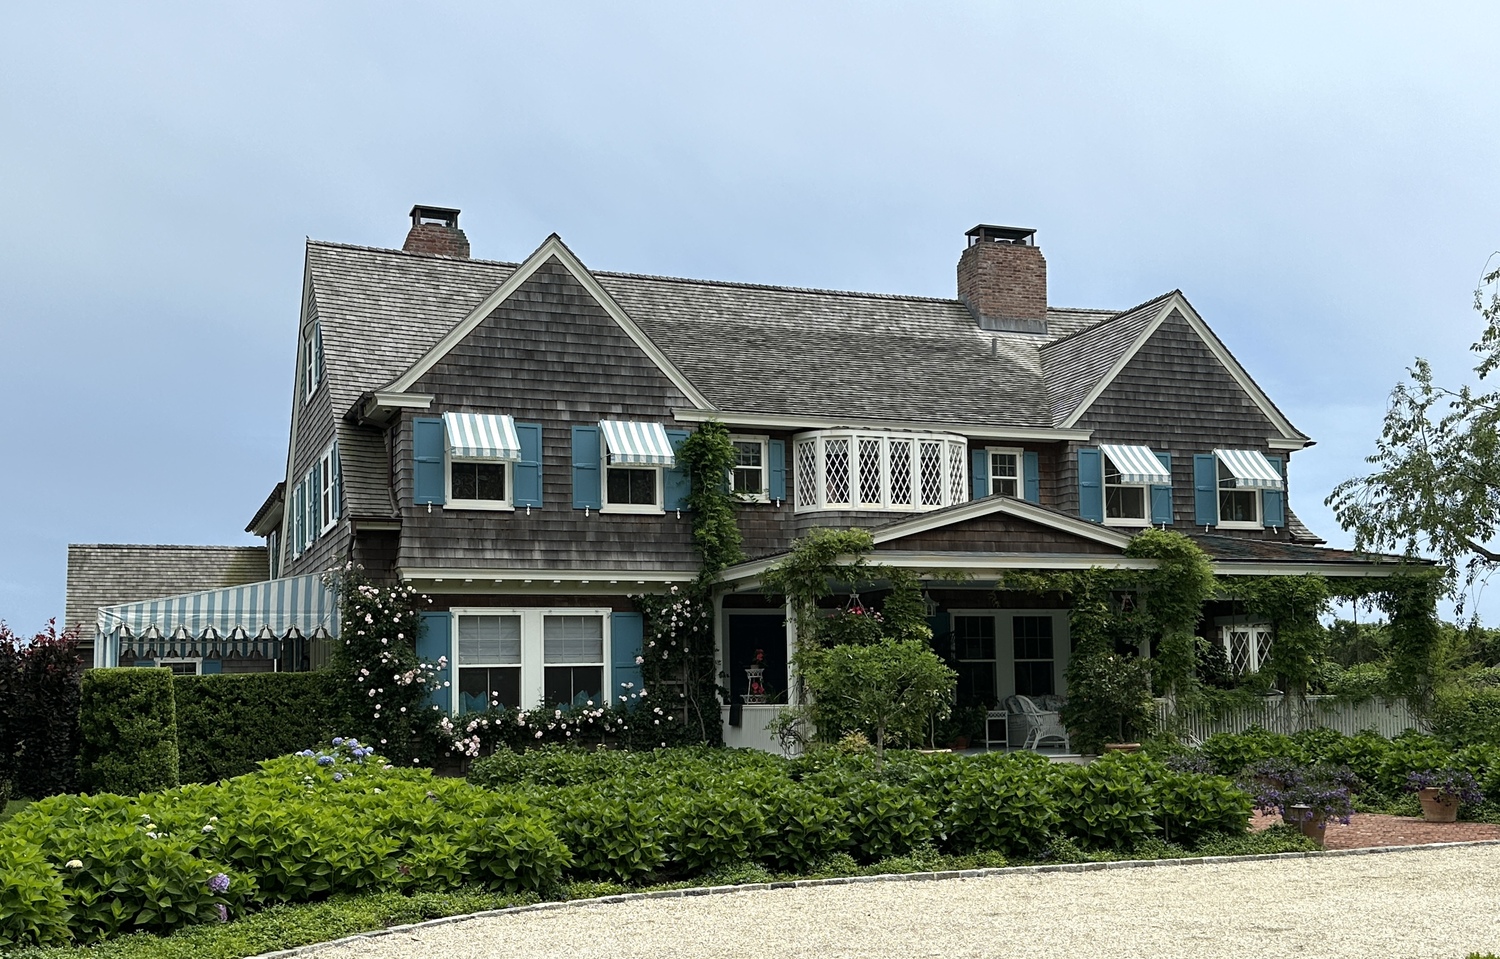 Grey Gardens as it appears today, pristine and charming. STEVEN STOLMAN